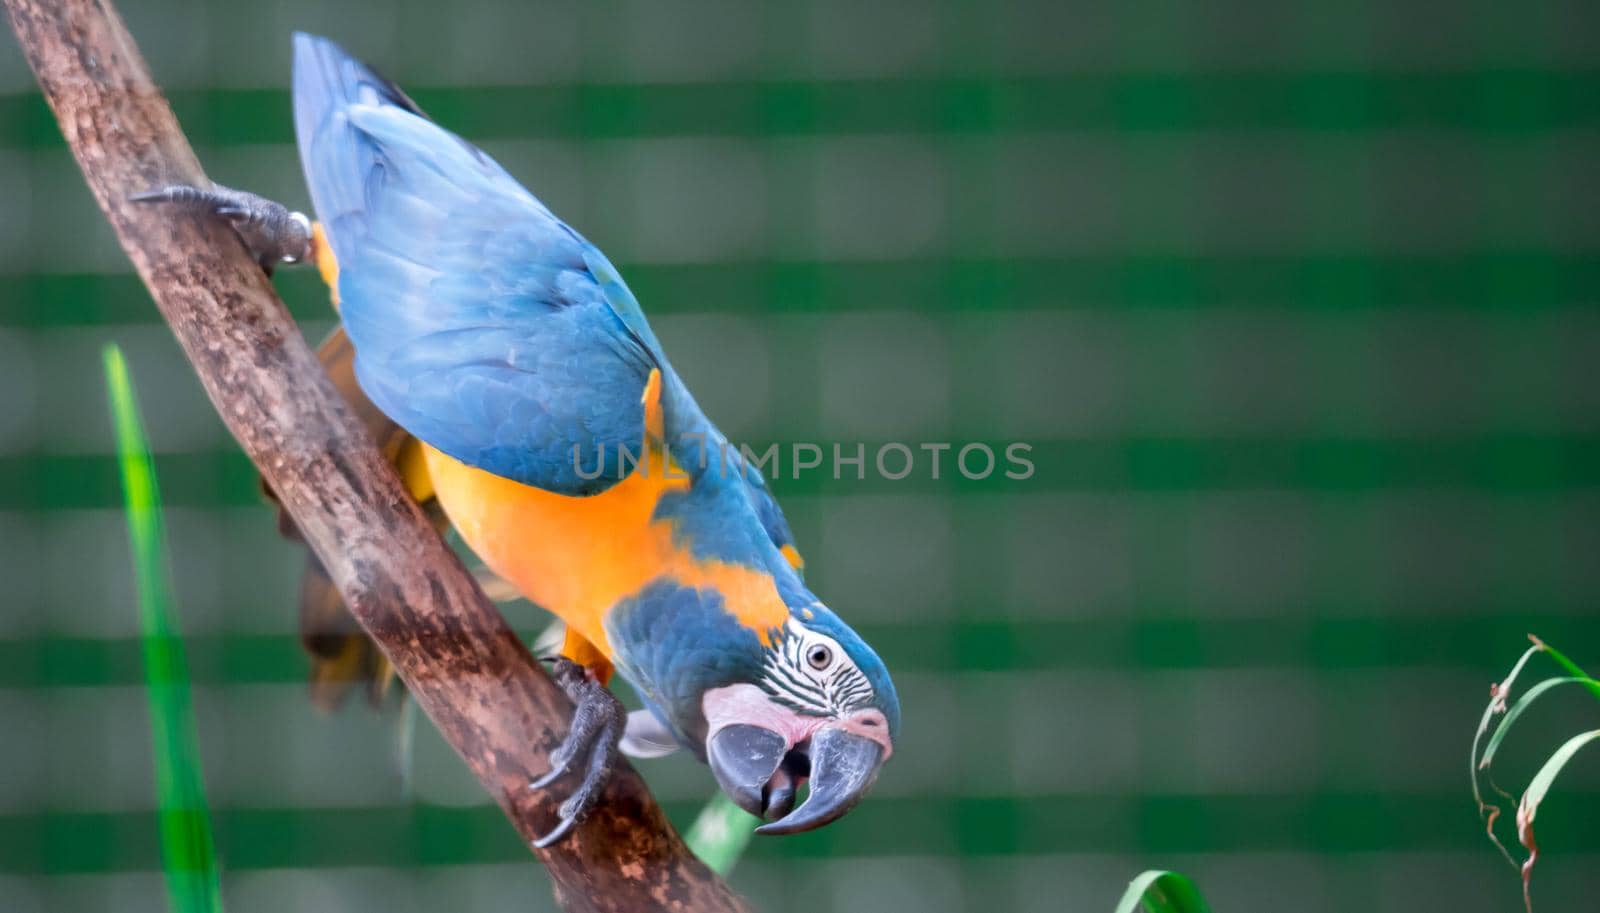 A beautiful blue-and-yellow macaw (Ara ararauna), also known as the blue-and-gold macaw by billroque